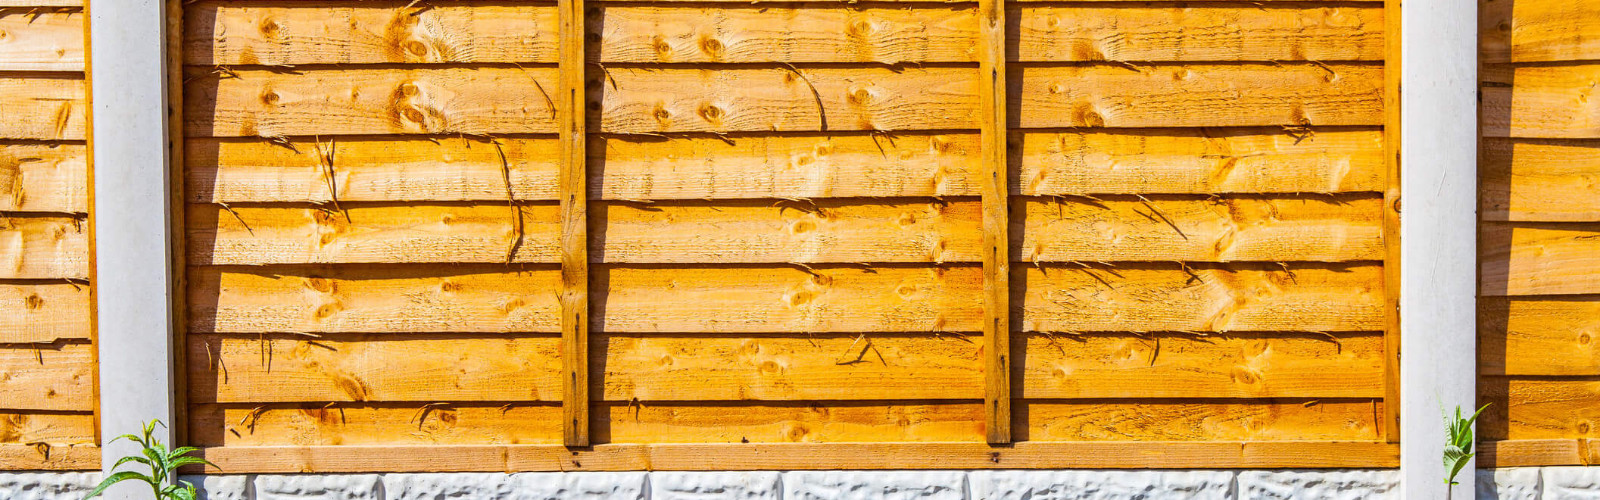 Fencing & Fence Repairs Dumfries